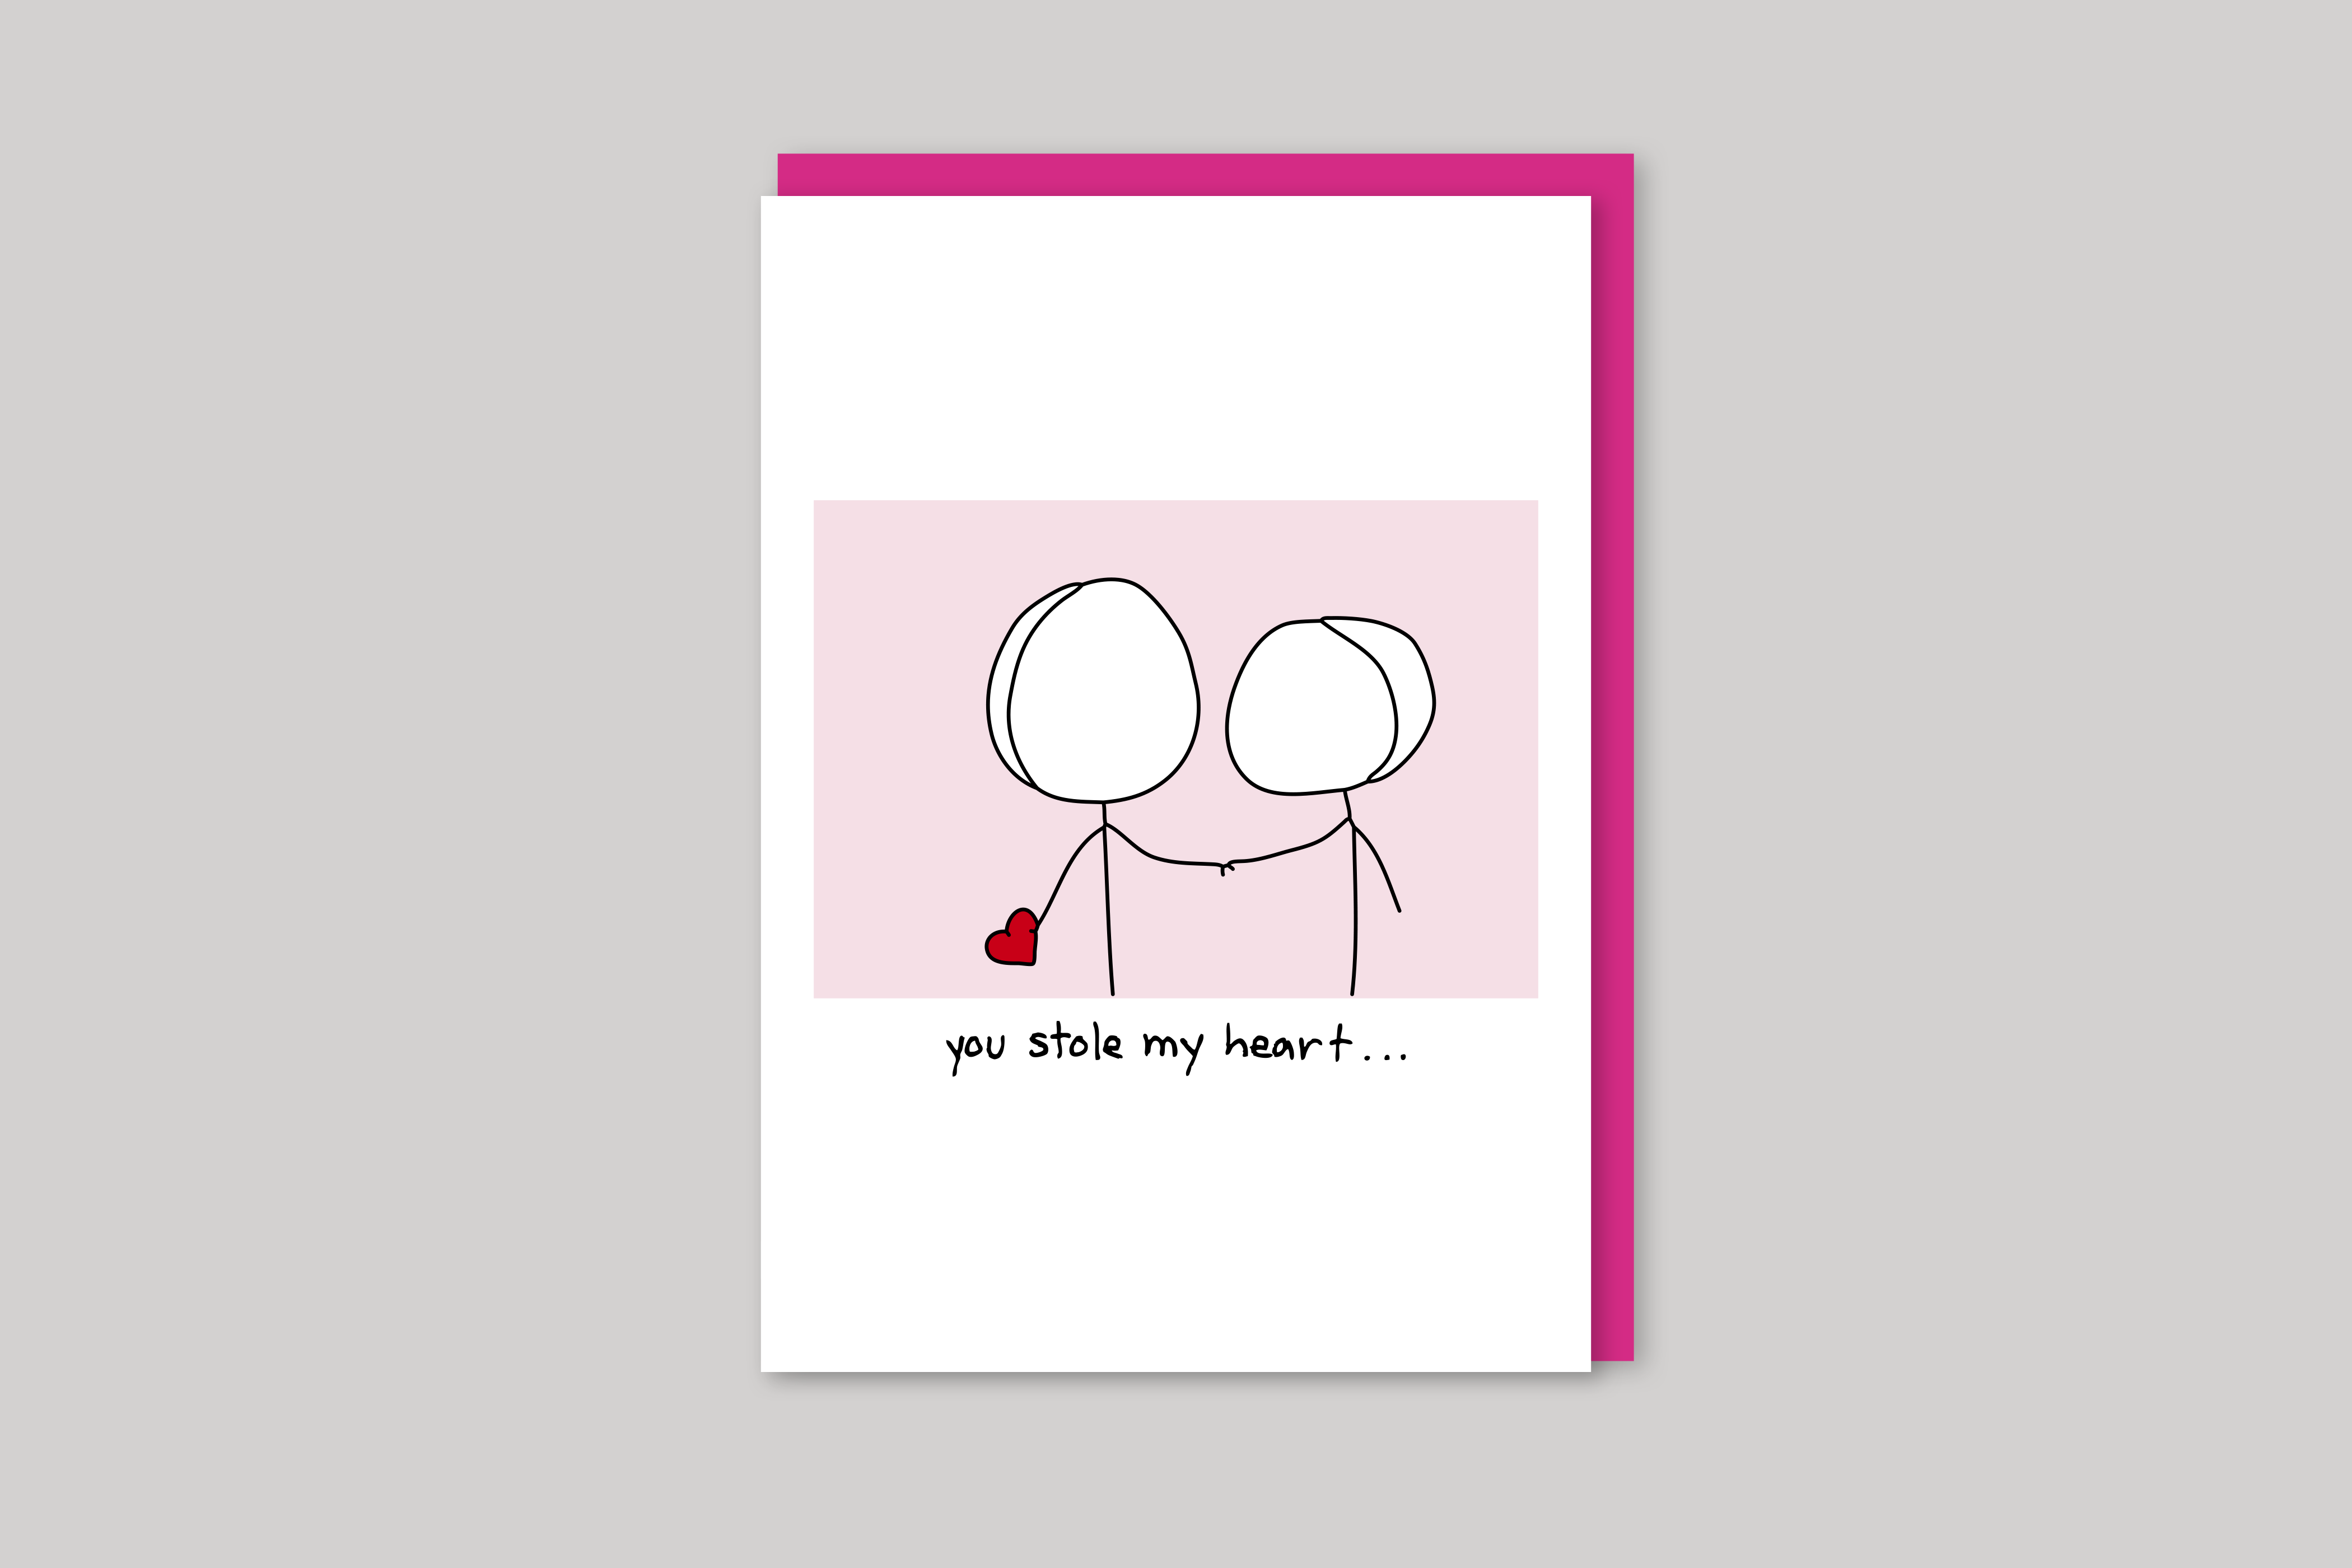 You Stole My Heart humorous illustration from Mean Cards range of greeting cards by Icon, back page.